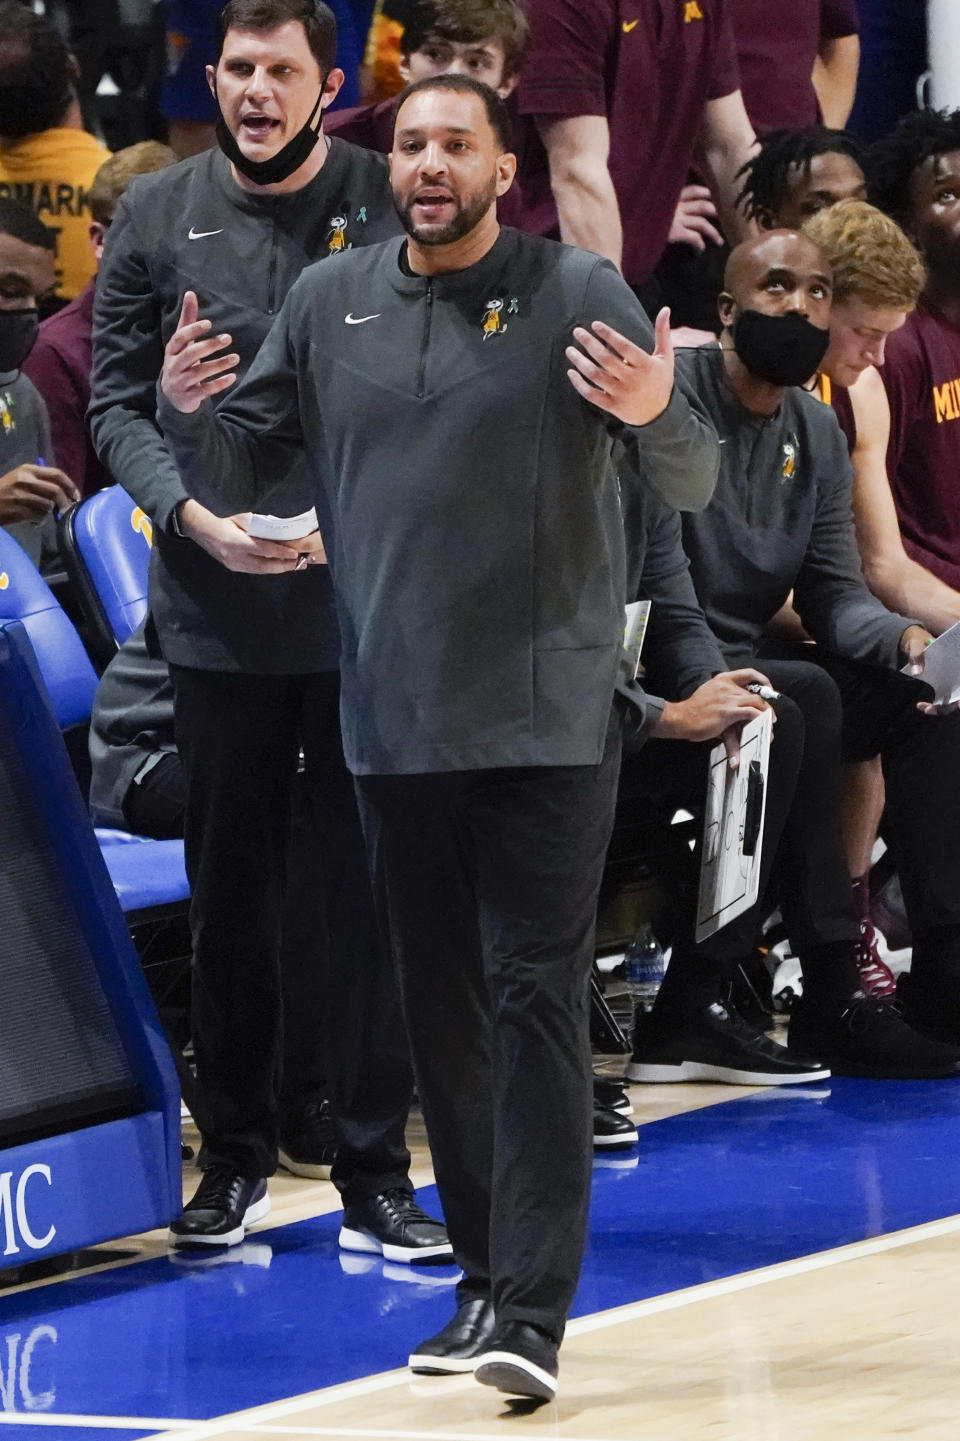 Minnesota coach Ben Johnson pleads to an official during the second half of the team's NCAA college basketball game against Pittsburgh, Tuesday, Nov. 30, 2021, in Pittsburgh. Minnesota won 54-53. (AP Photo/Keith Srakocic)